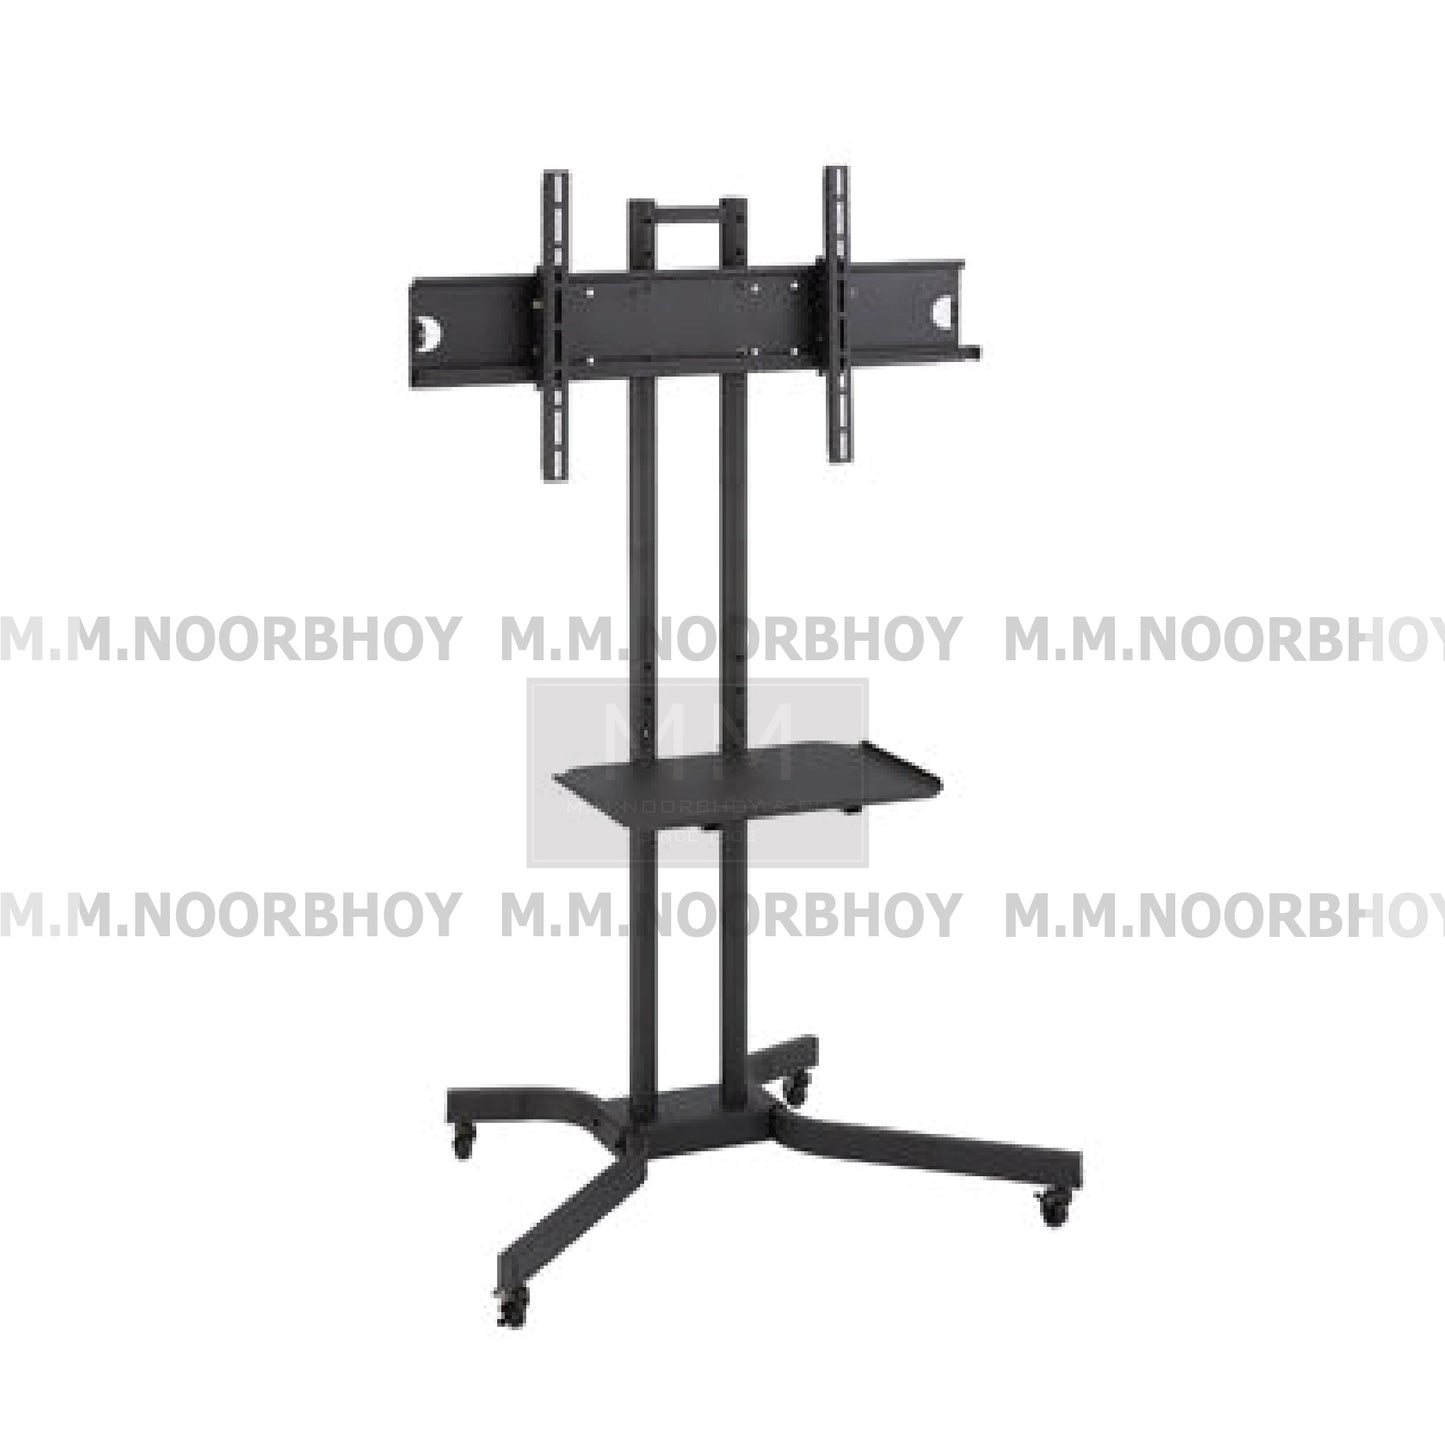 Mcoco Lcd & Led Tv Bracket Floor Stand With 4 Wheels Suitable For 32" to 60" Tvs, Black Colour - D910